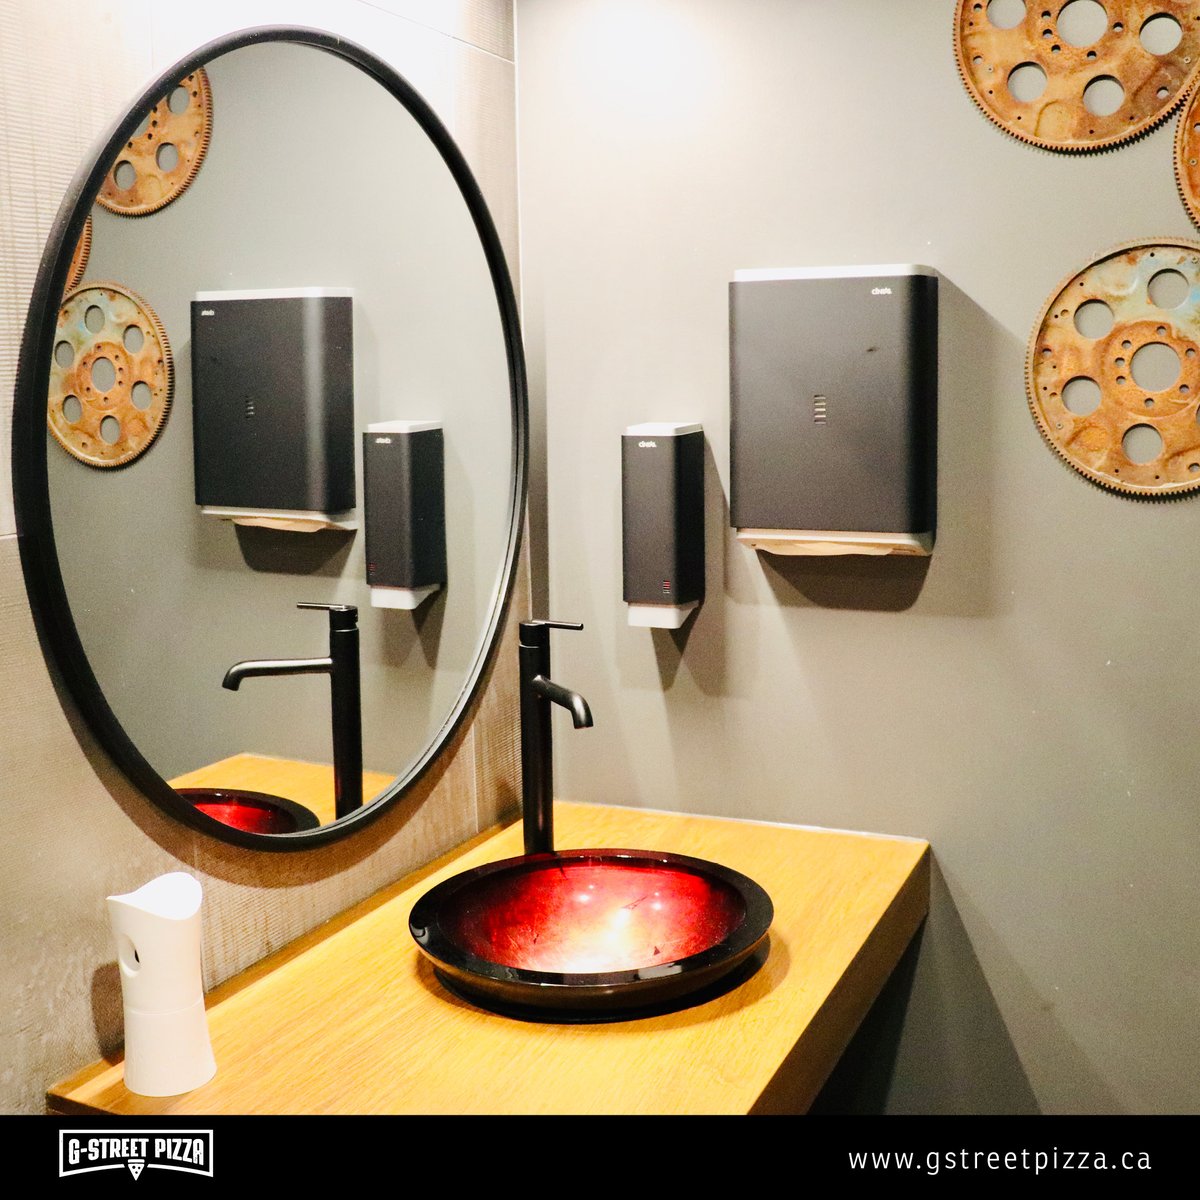 Okay, not your typical IG photo...but we have to say, our bathrooms are pretty awesome! Every inch of our space is curated to bring you the most delightful dining experience.

#foodie #supportlocal #veganoptions #gstreet #halifax #curatedspace #hfxrestaurant #gottingenstreet